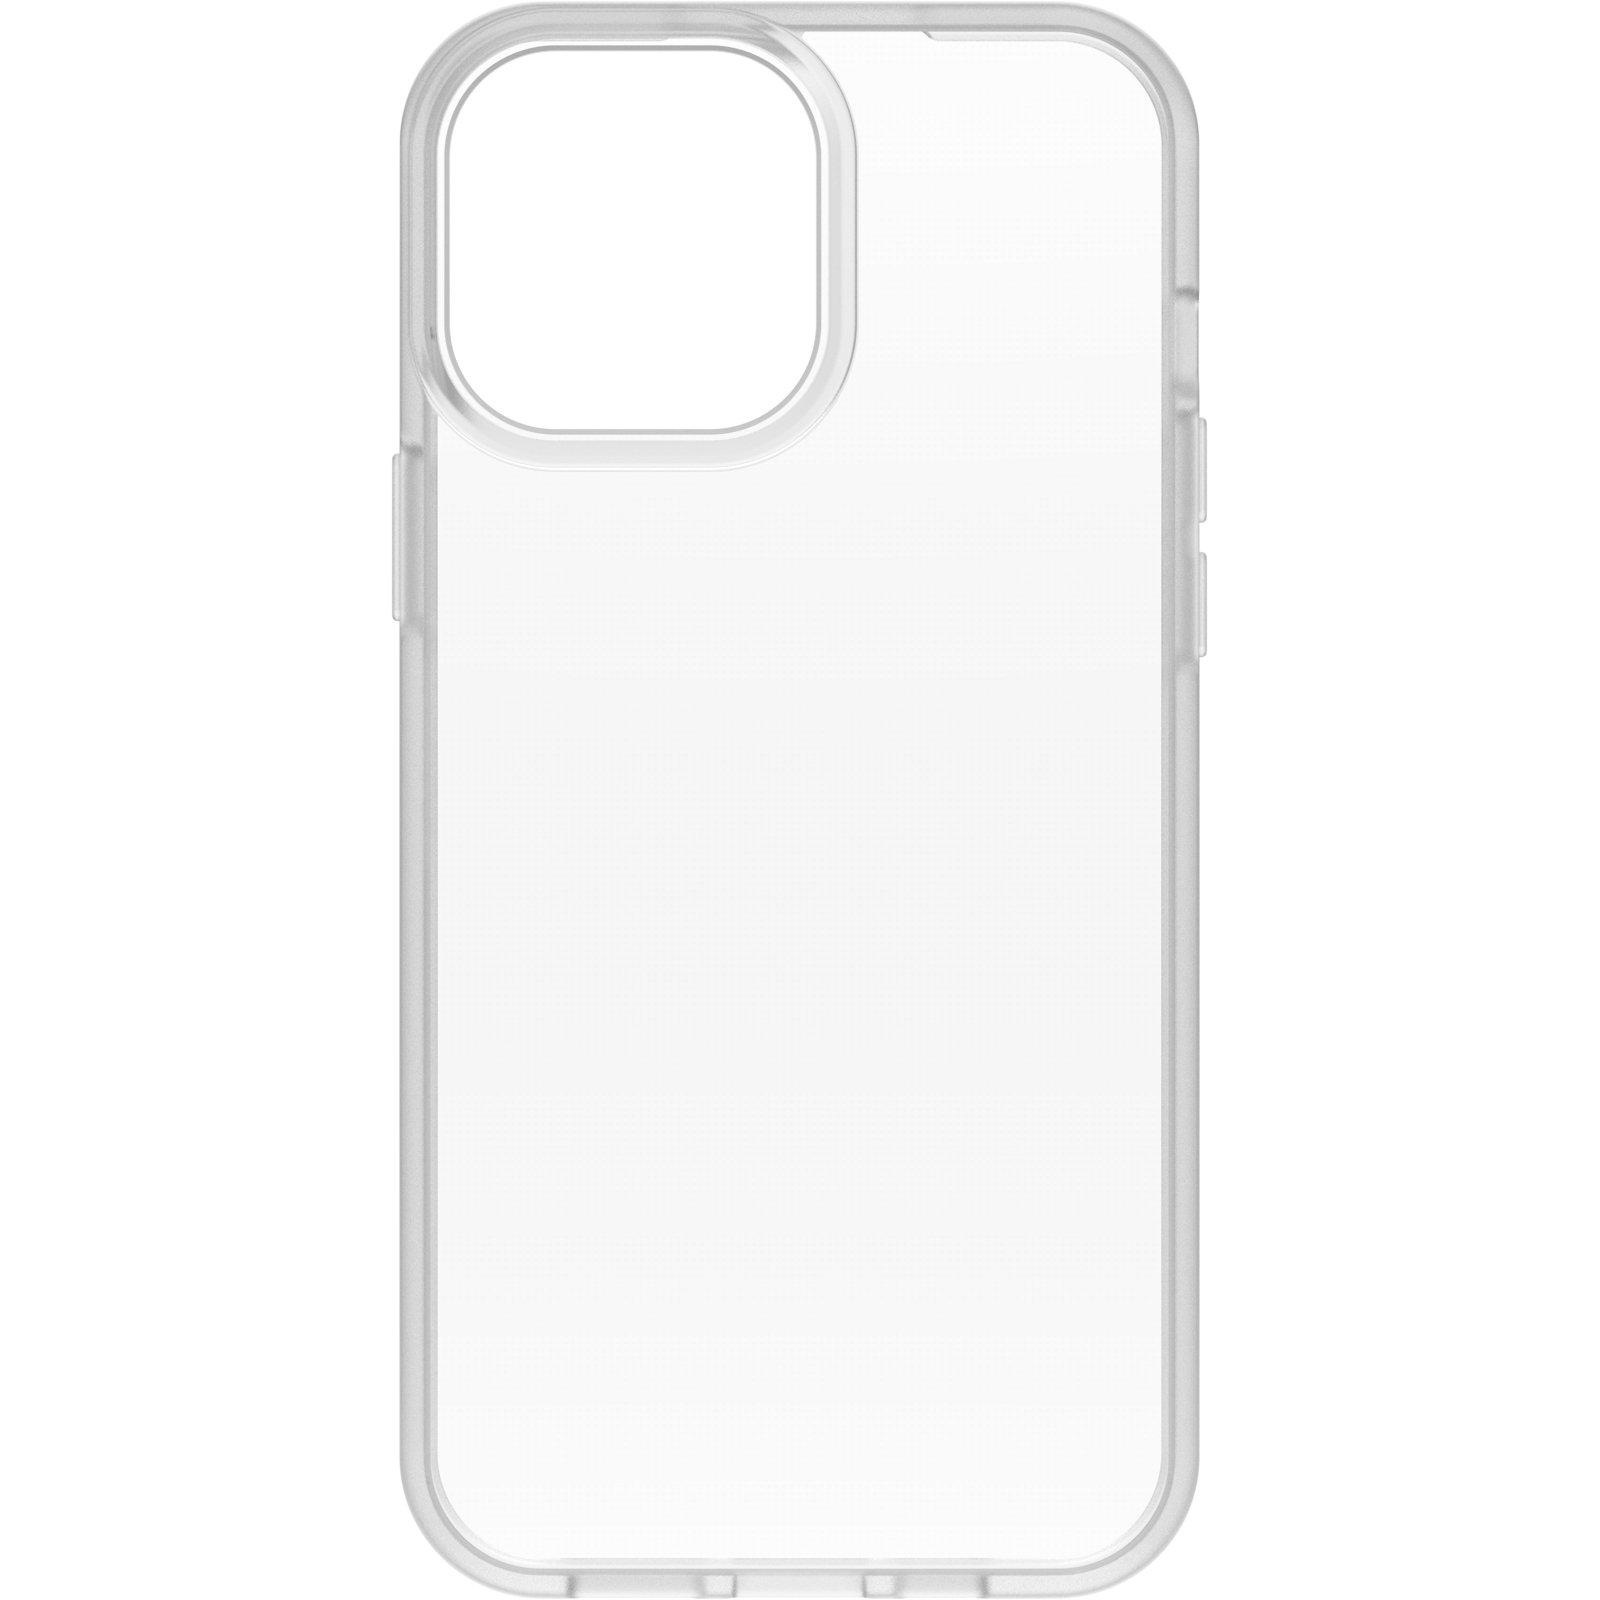 OtterBox React Series for Apple iPhone 13 Pro Max / iPhone 12 Pro Max, transparent - No retail packaging